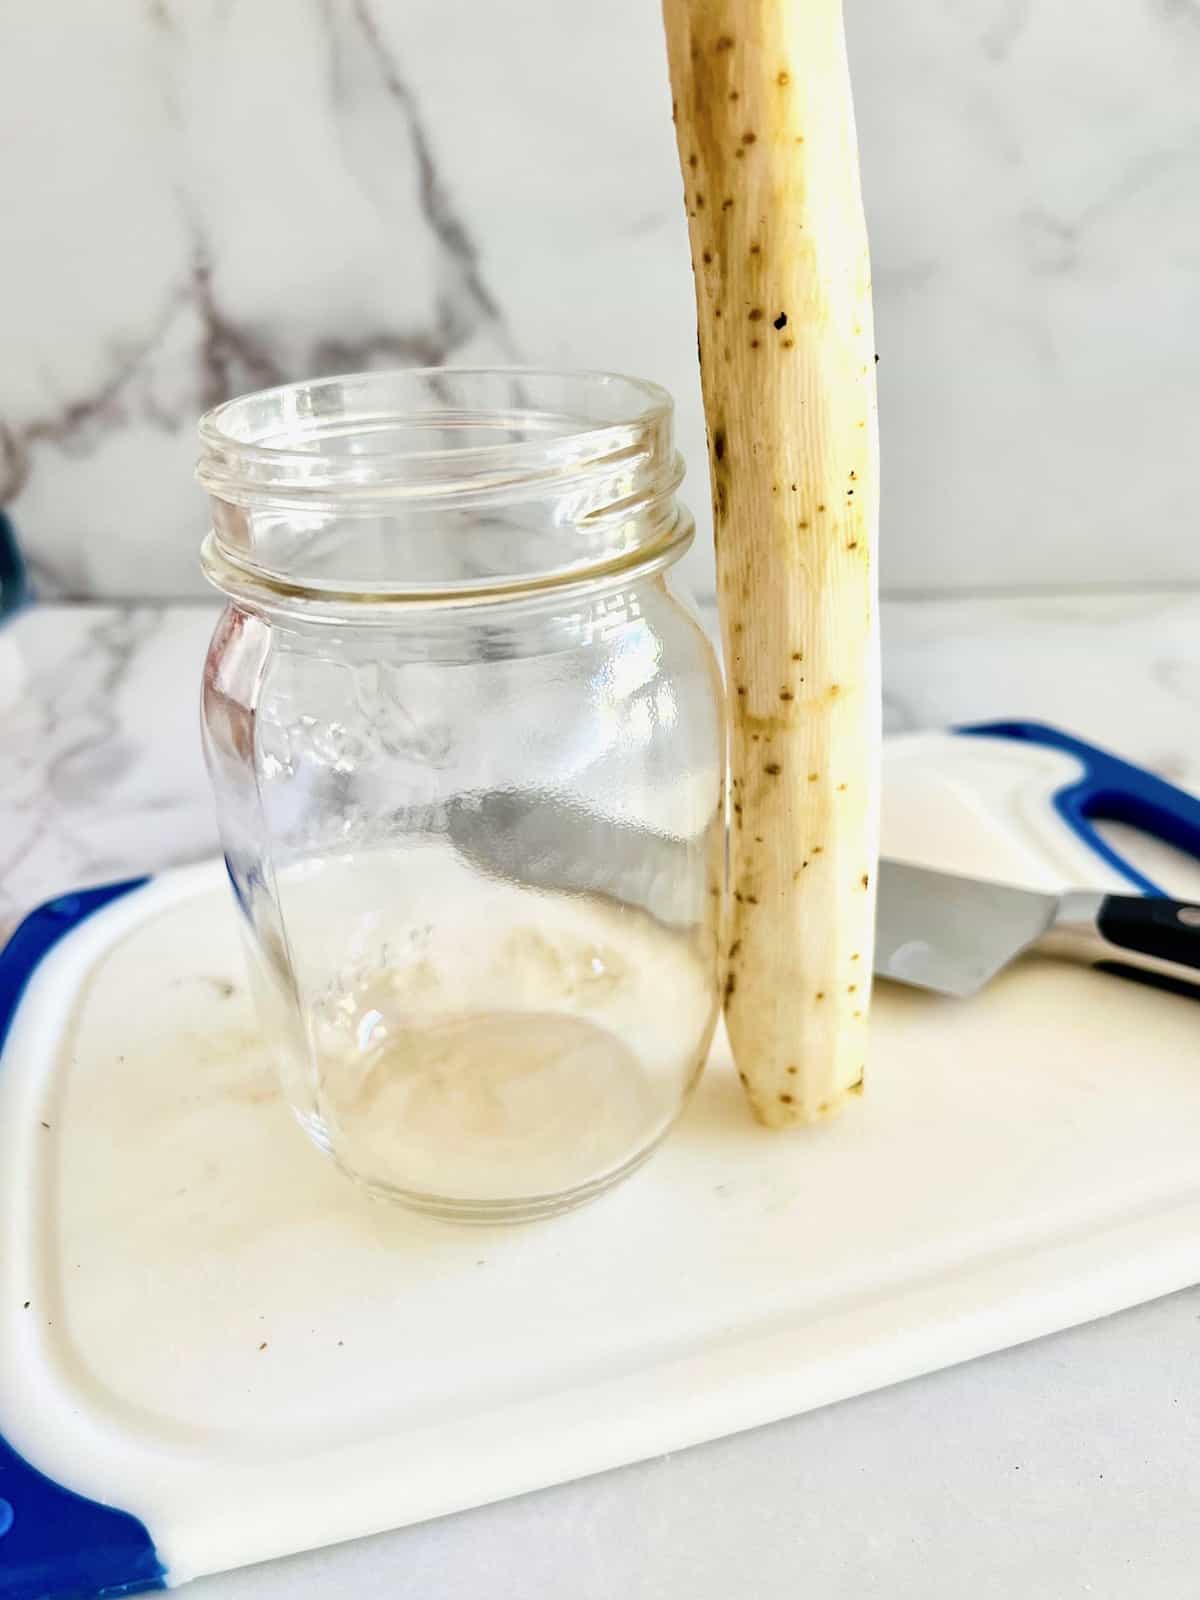 Holding the peeled burdock root next to the mason jar to judge where to cut.